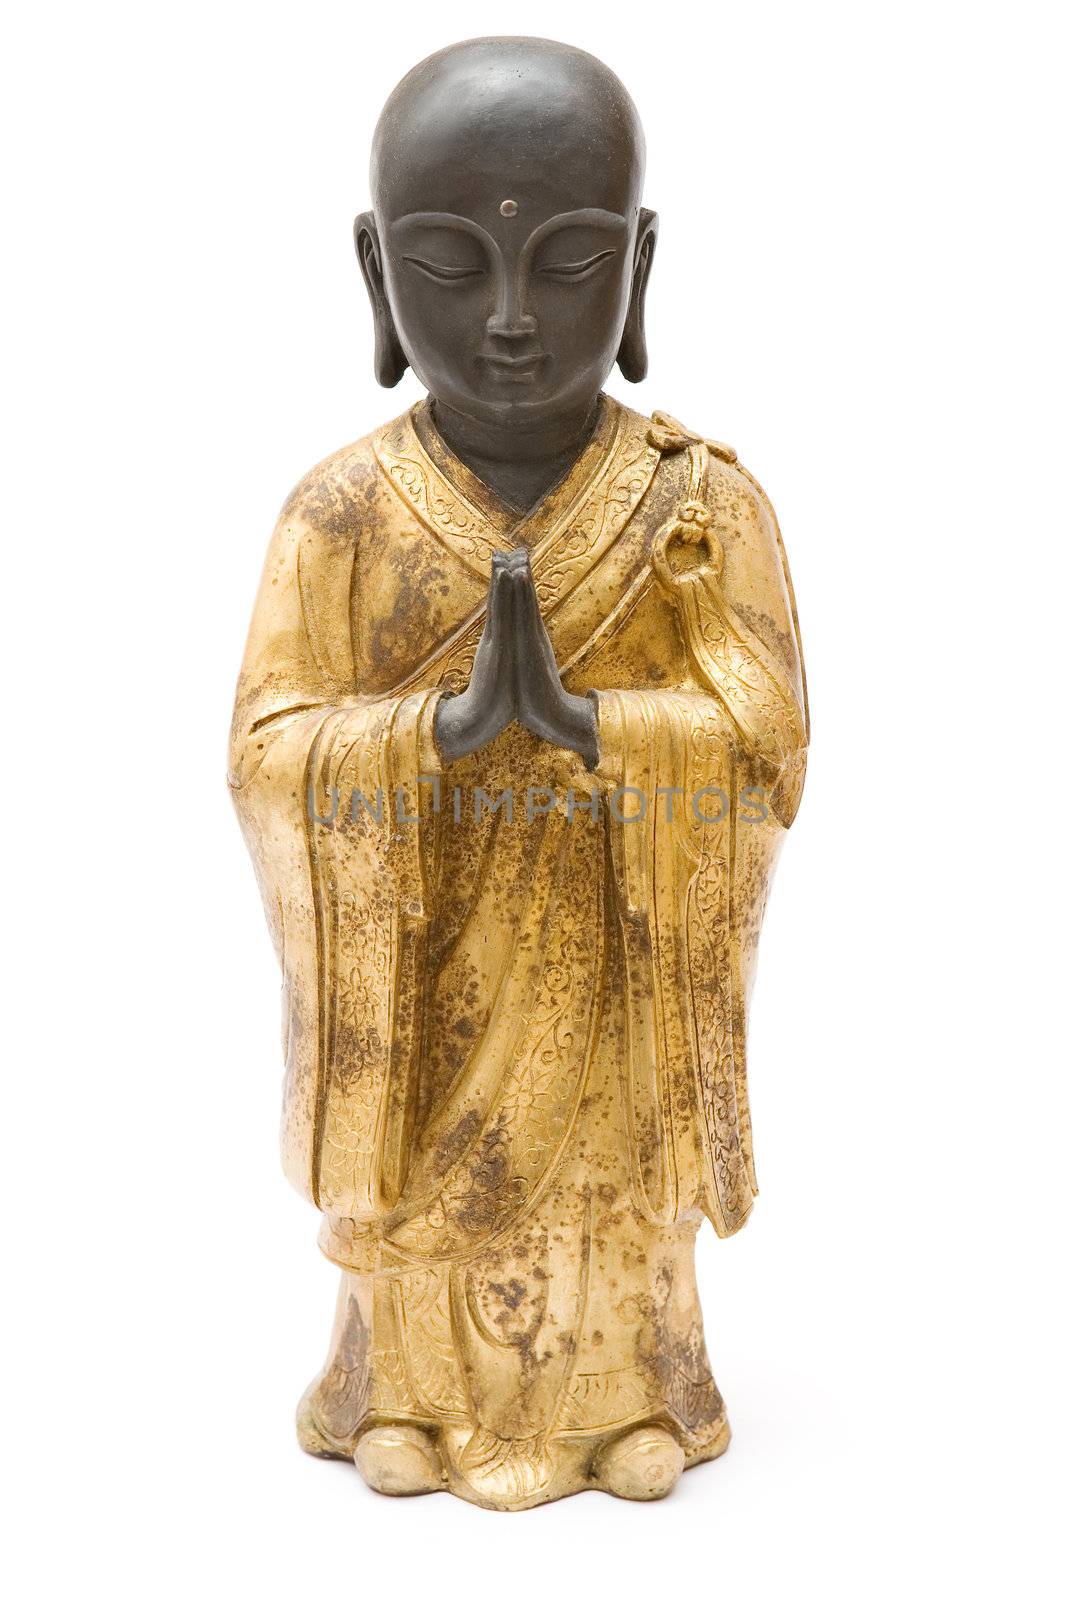 Antique statue isolated on a white background.